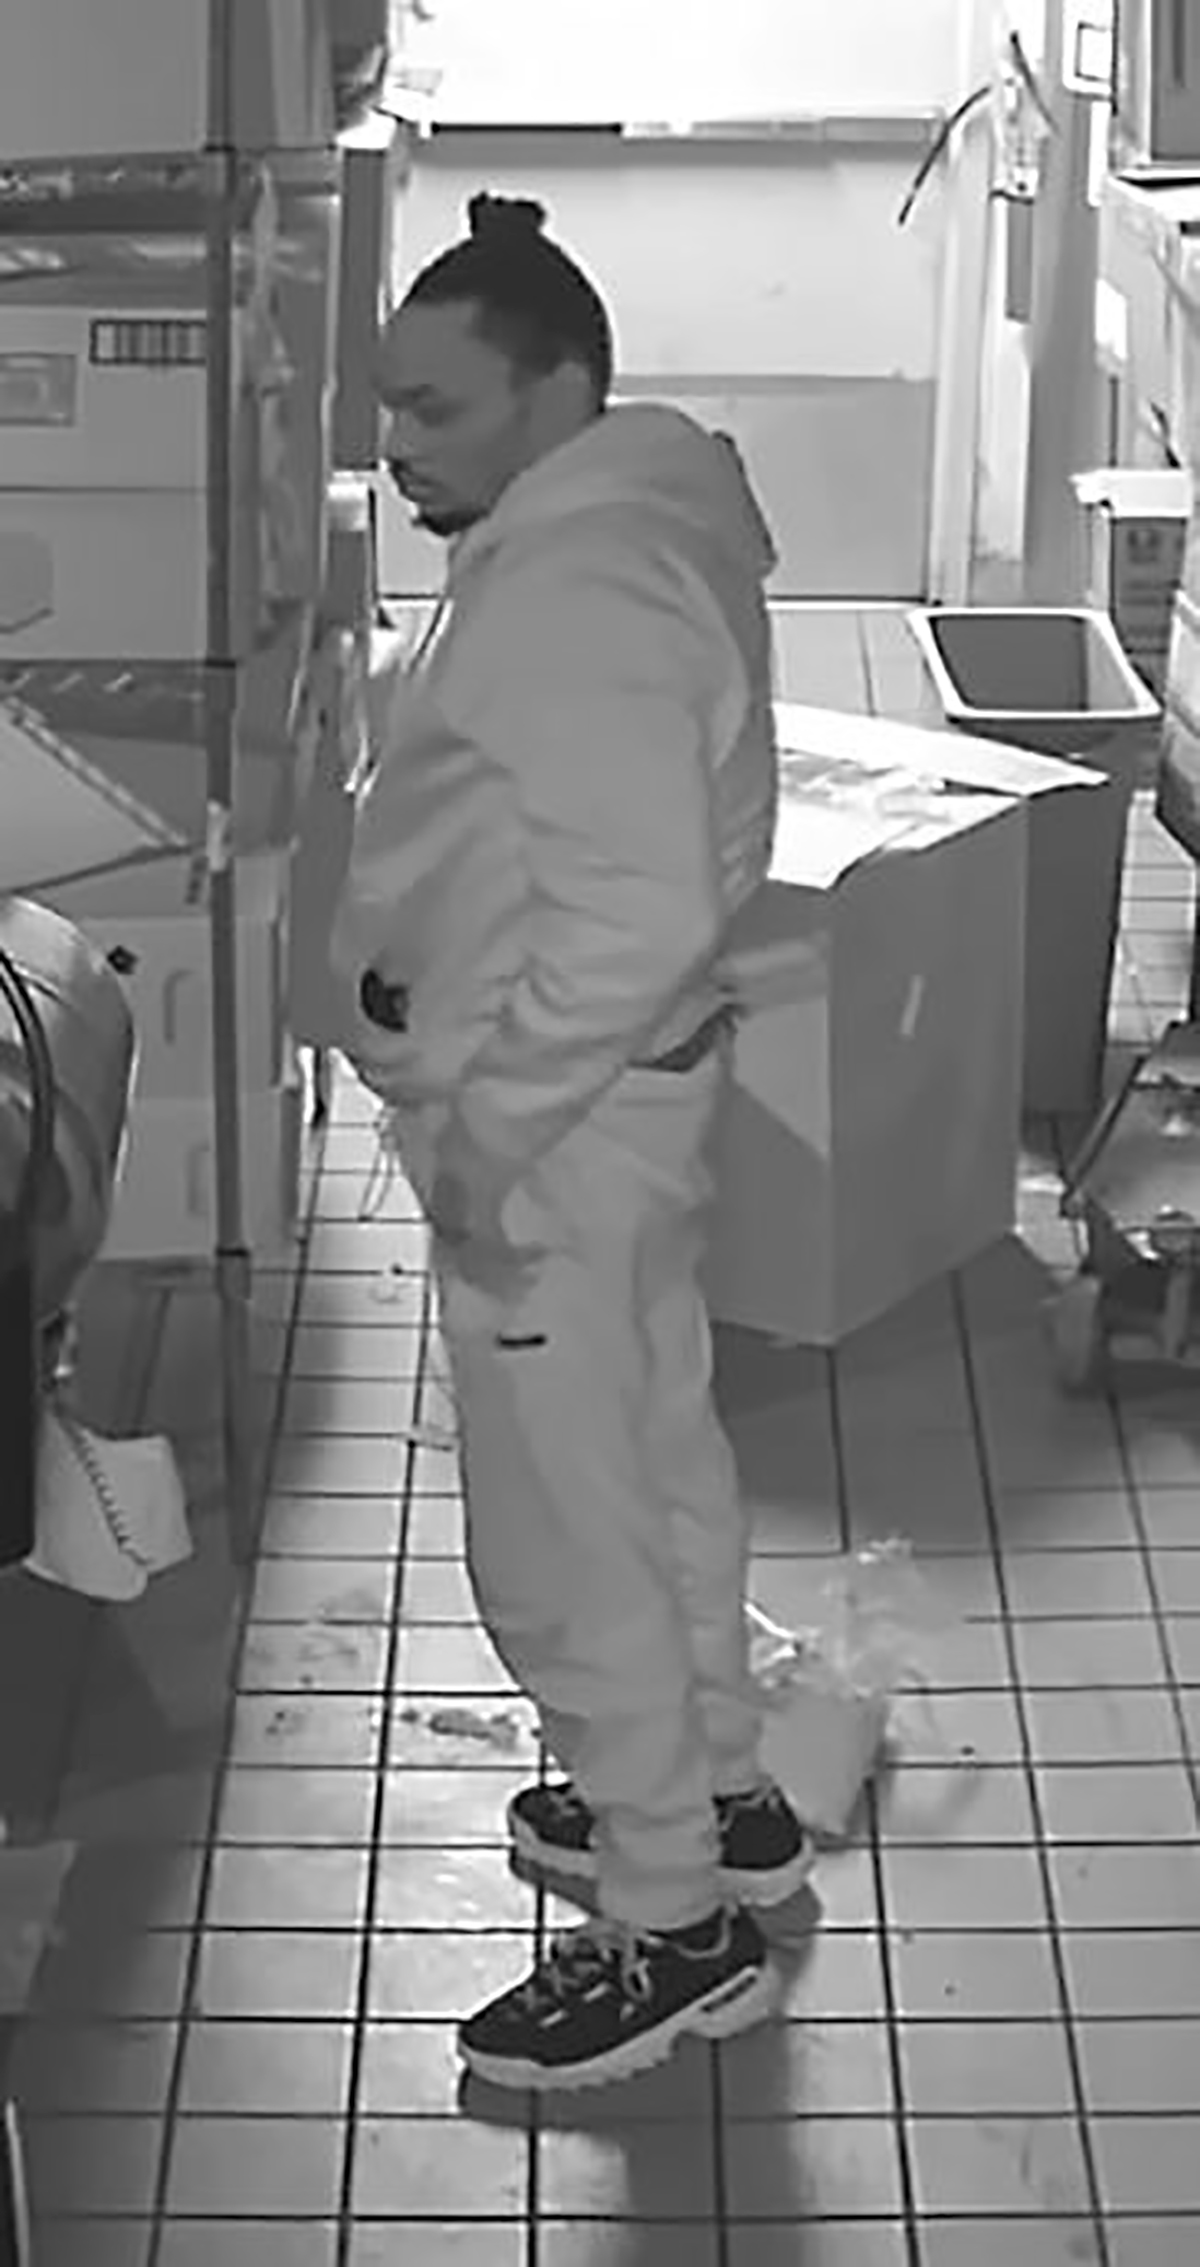 PHOTO: Police in Georgia are asking the public to help identify a man who prepared food and napped during a burglary at a local Taco Bell in Lawrenceville, Ga., on Dec. 25, 2019.